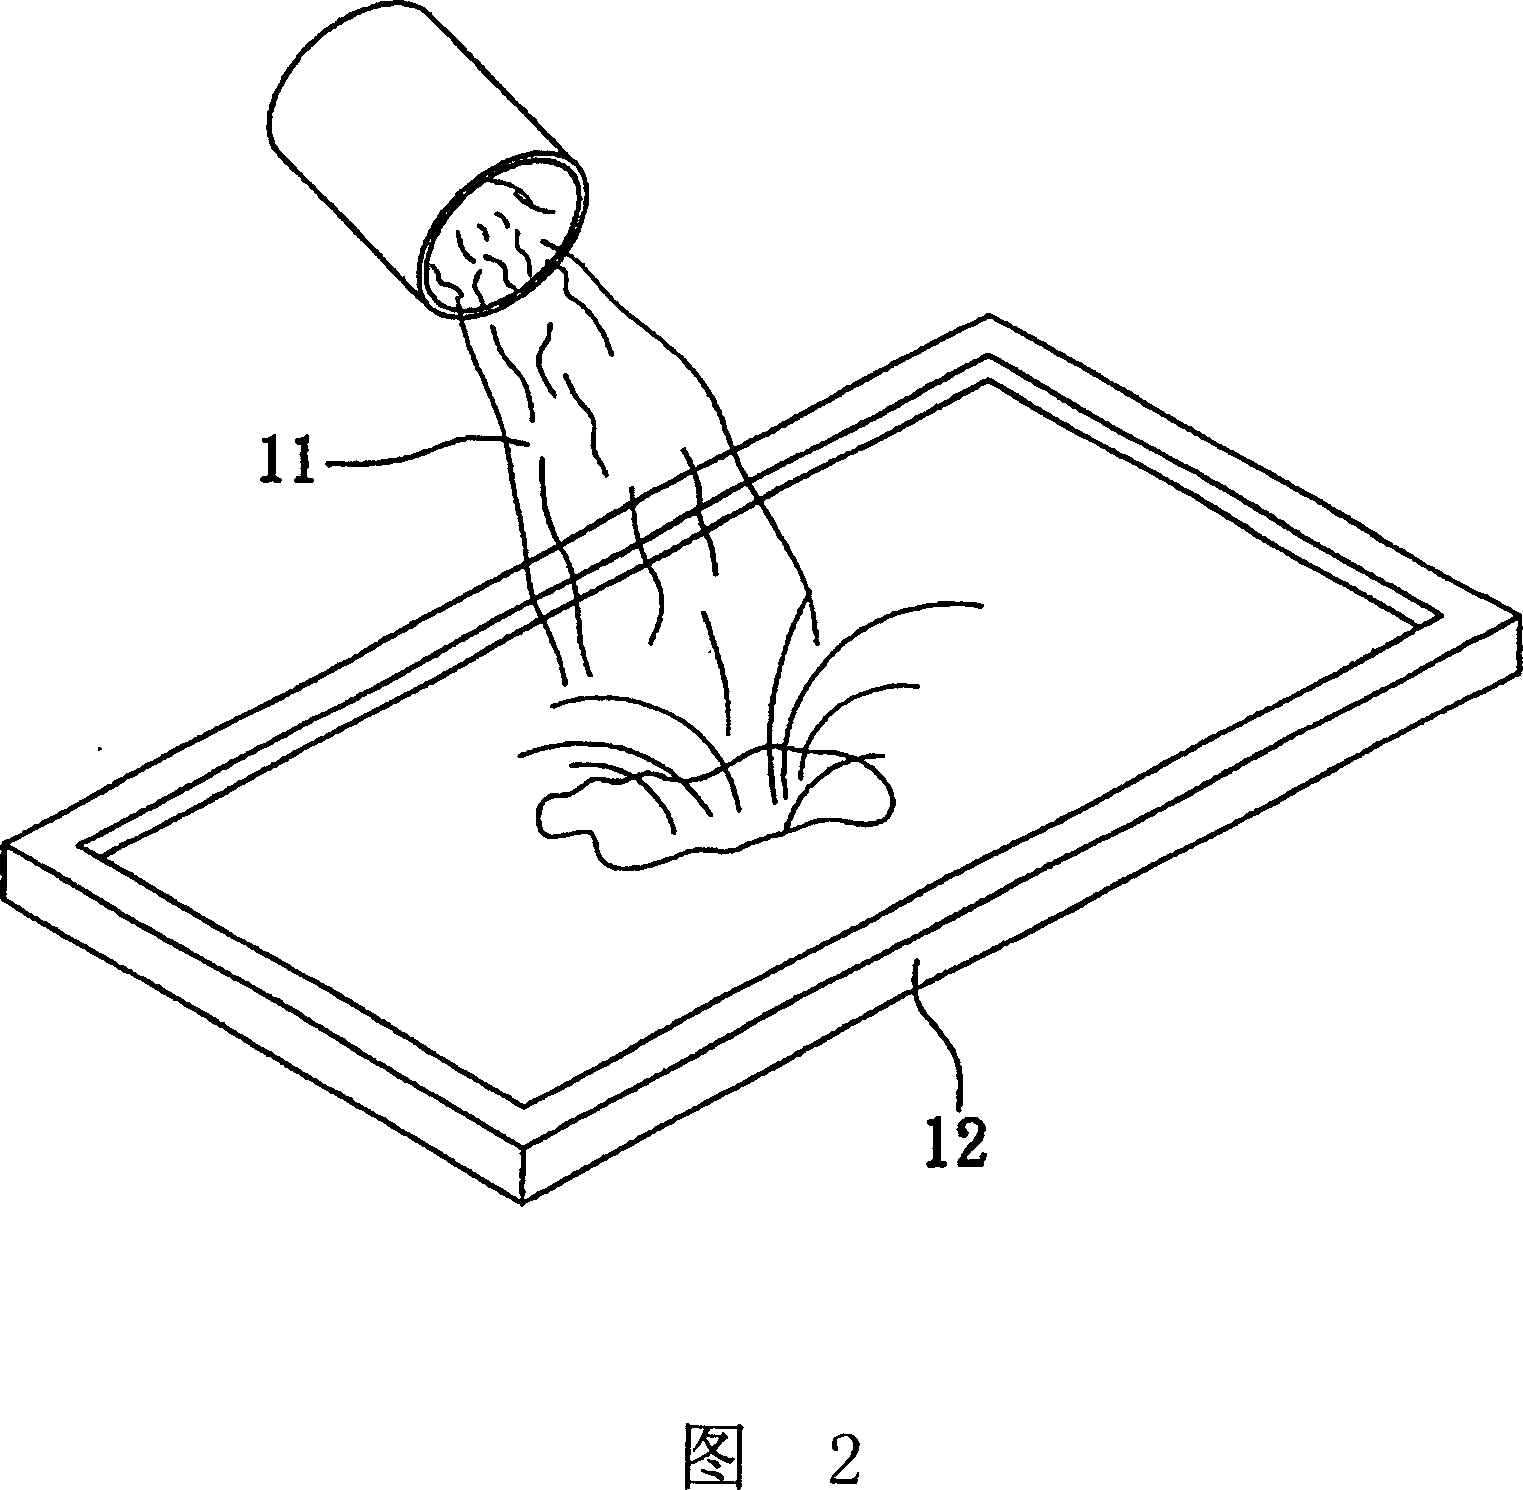 Method for fabricating artificial dimension stones